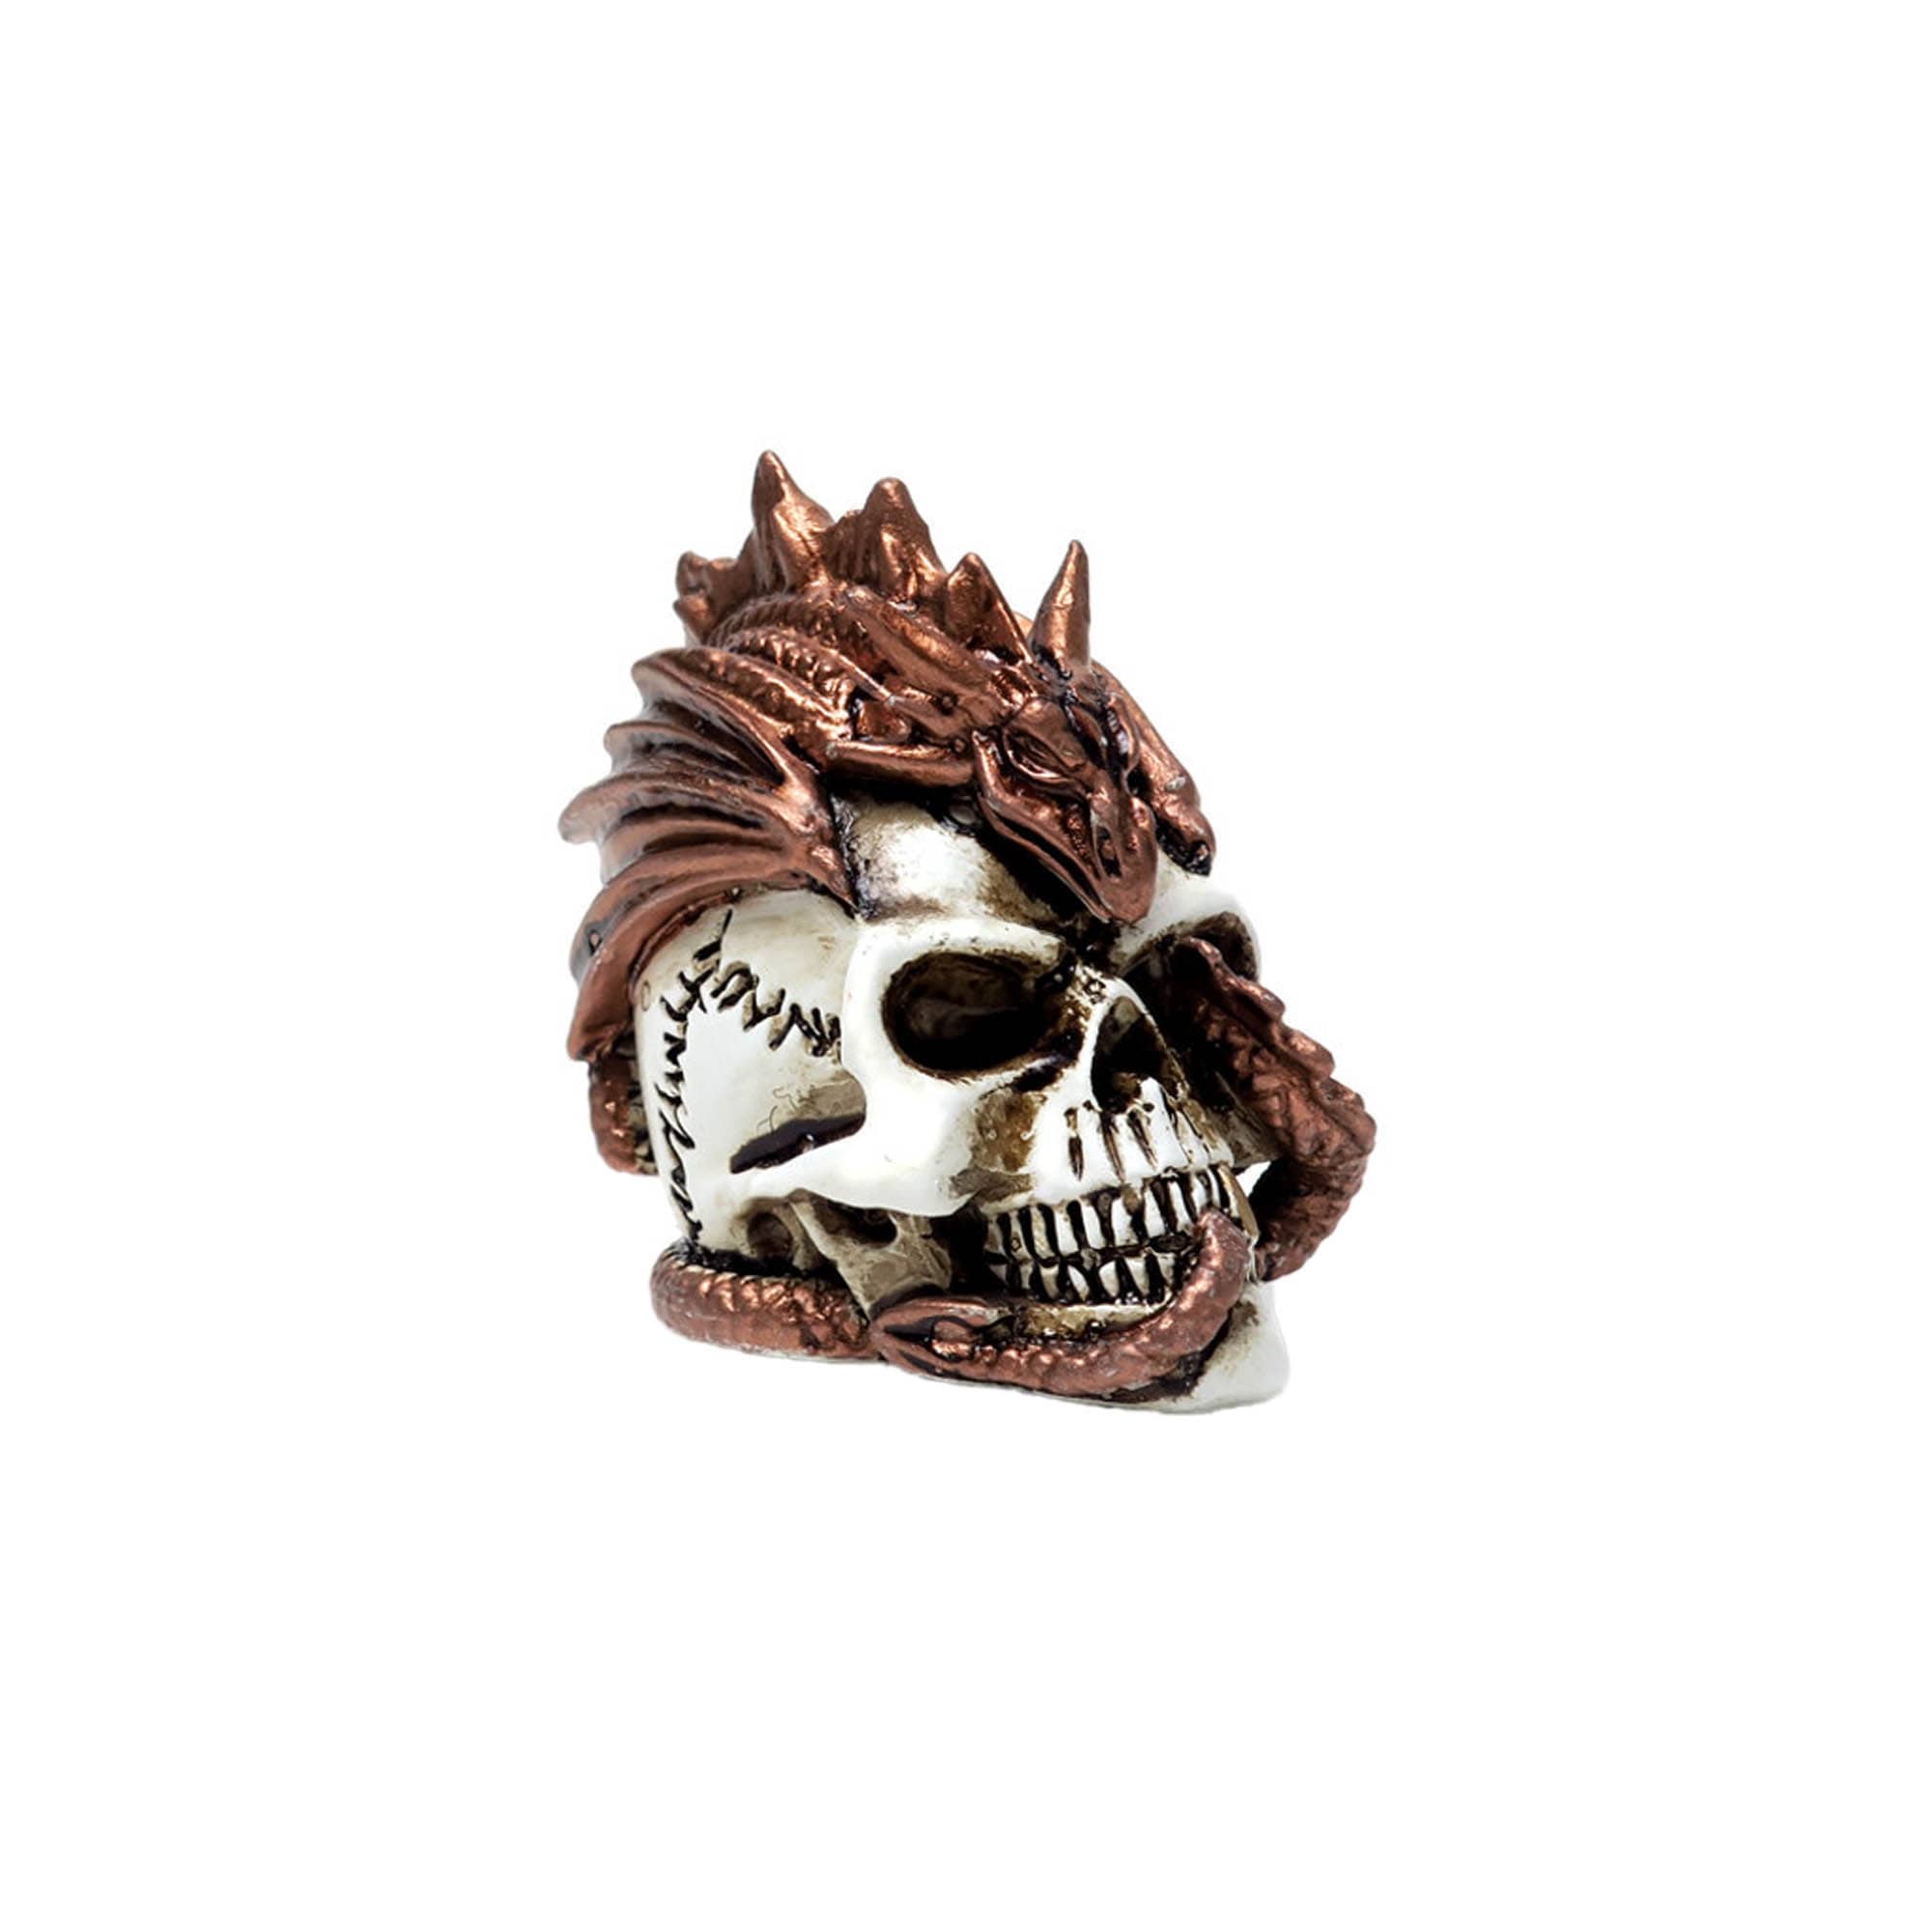 Alchemy of England The Vault Dragon Keepers Skull Miniature - 1.5